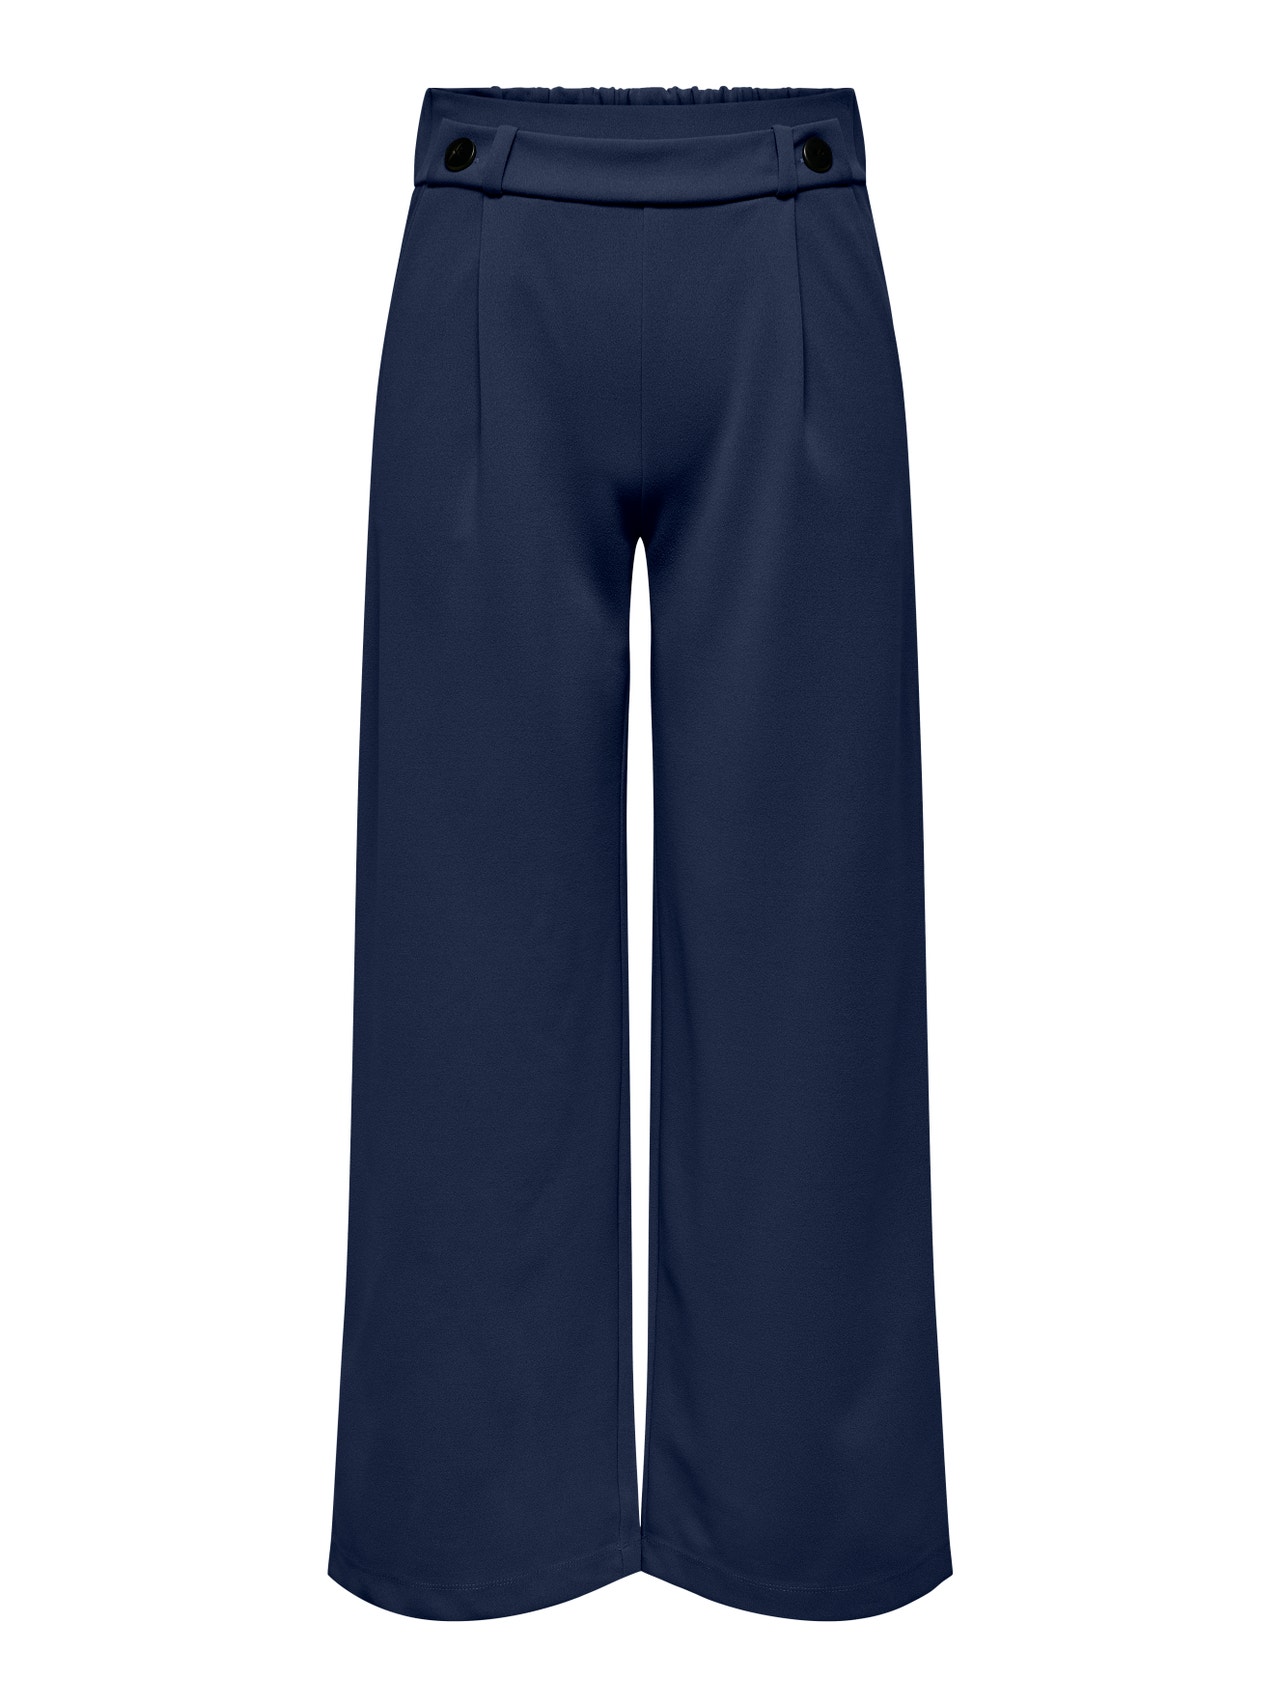 ONLY Wide Trousers -Black Iris - 15208430